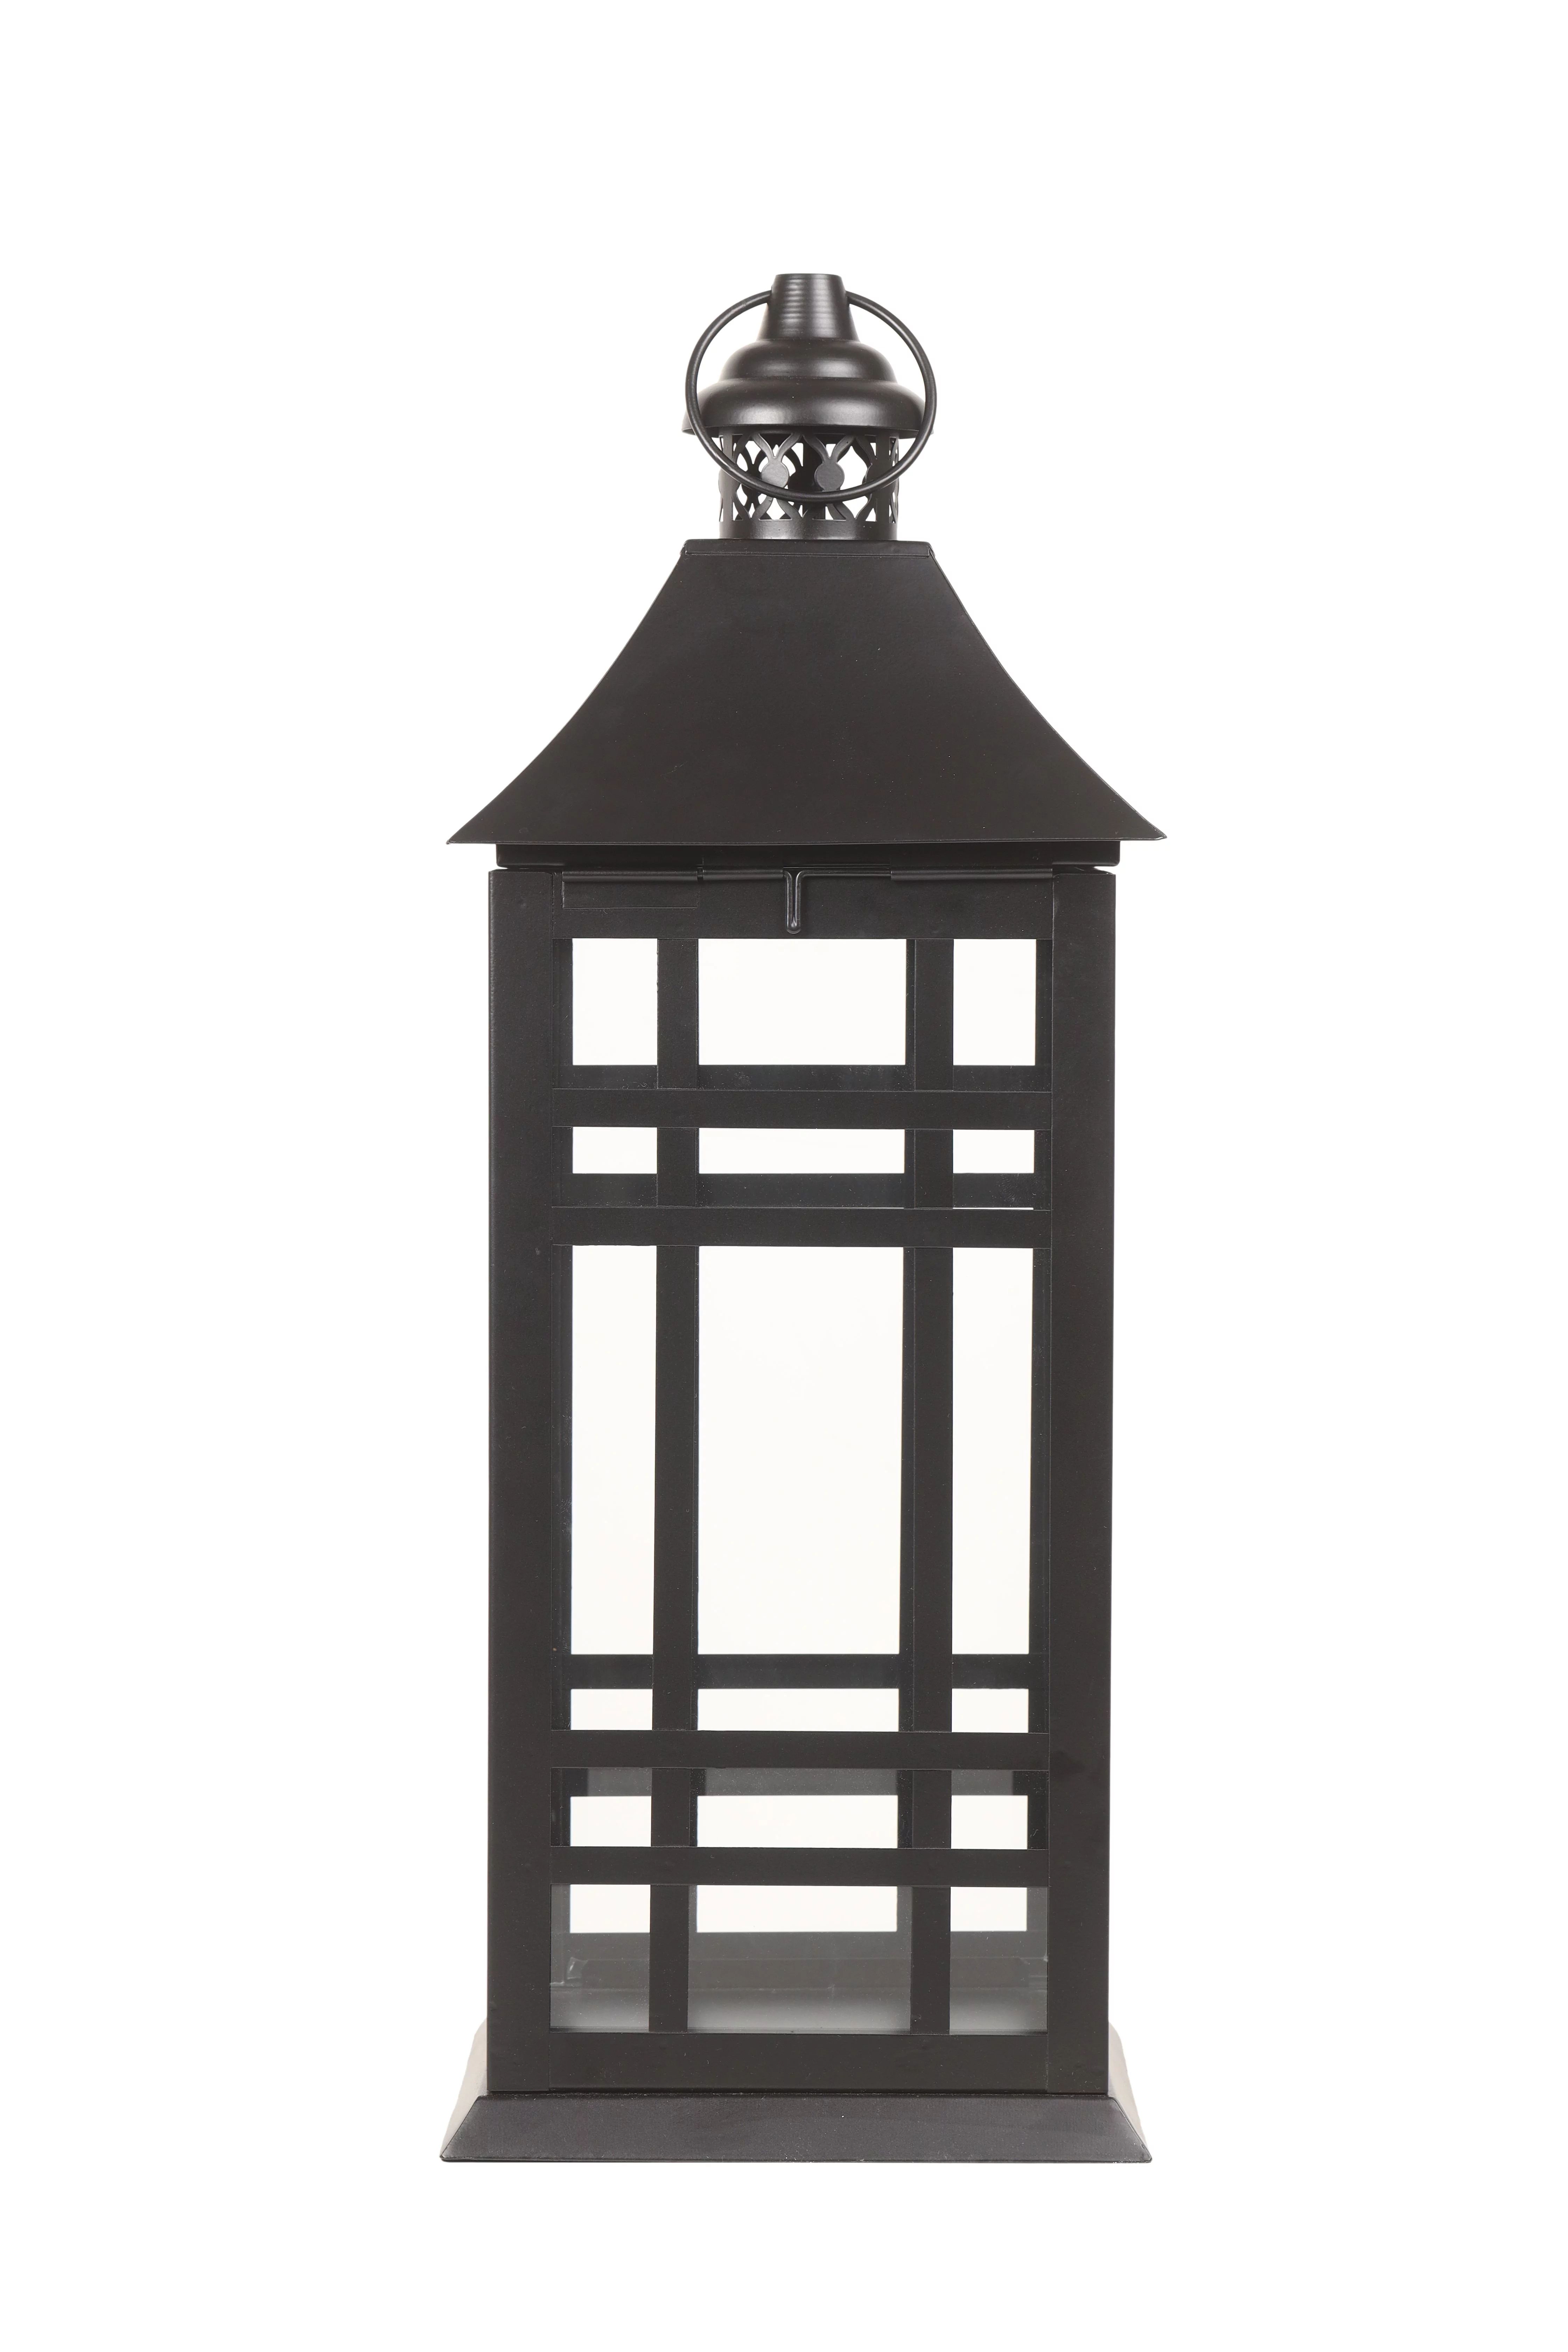 Holiday Time Black Metal Candle Holder Lanterns in Square Shape, 24 inch Height | Walmart (US)